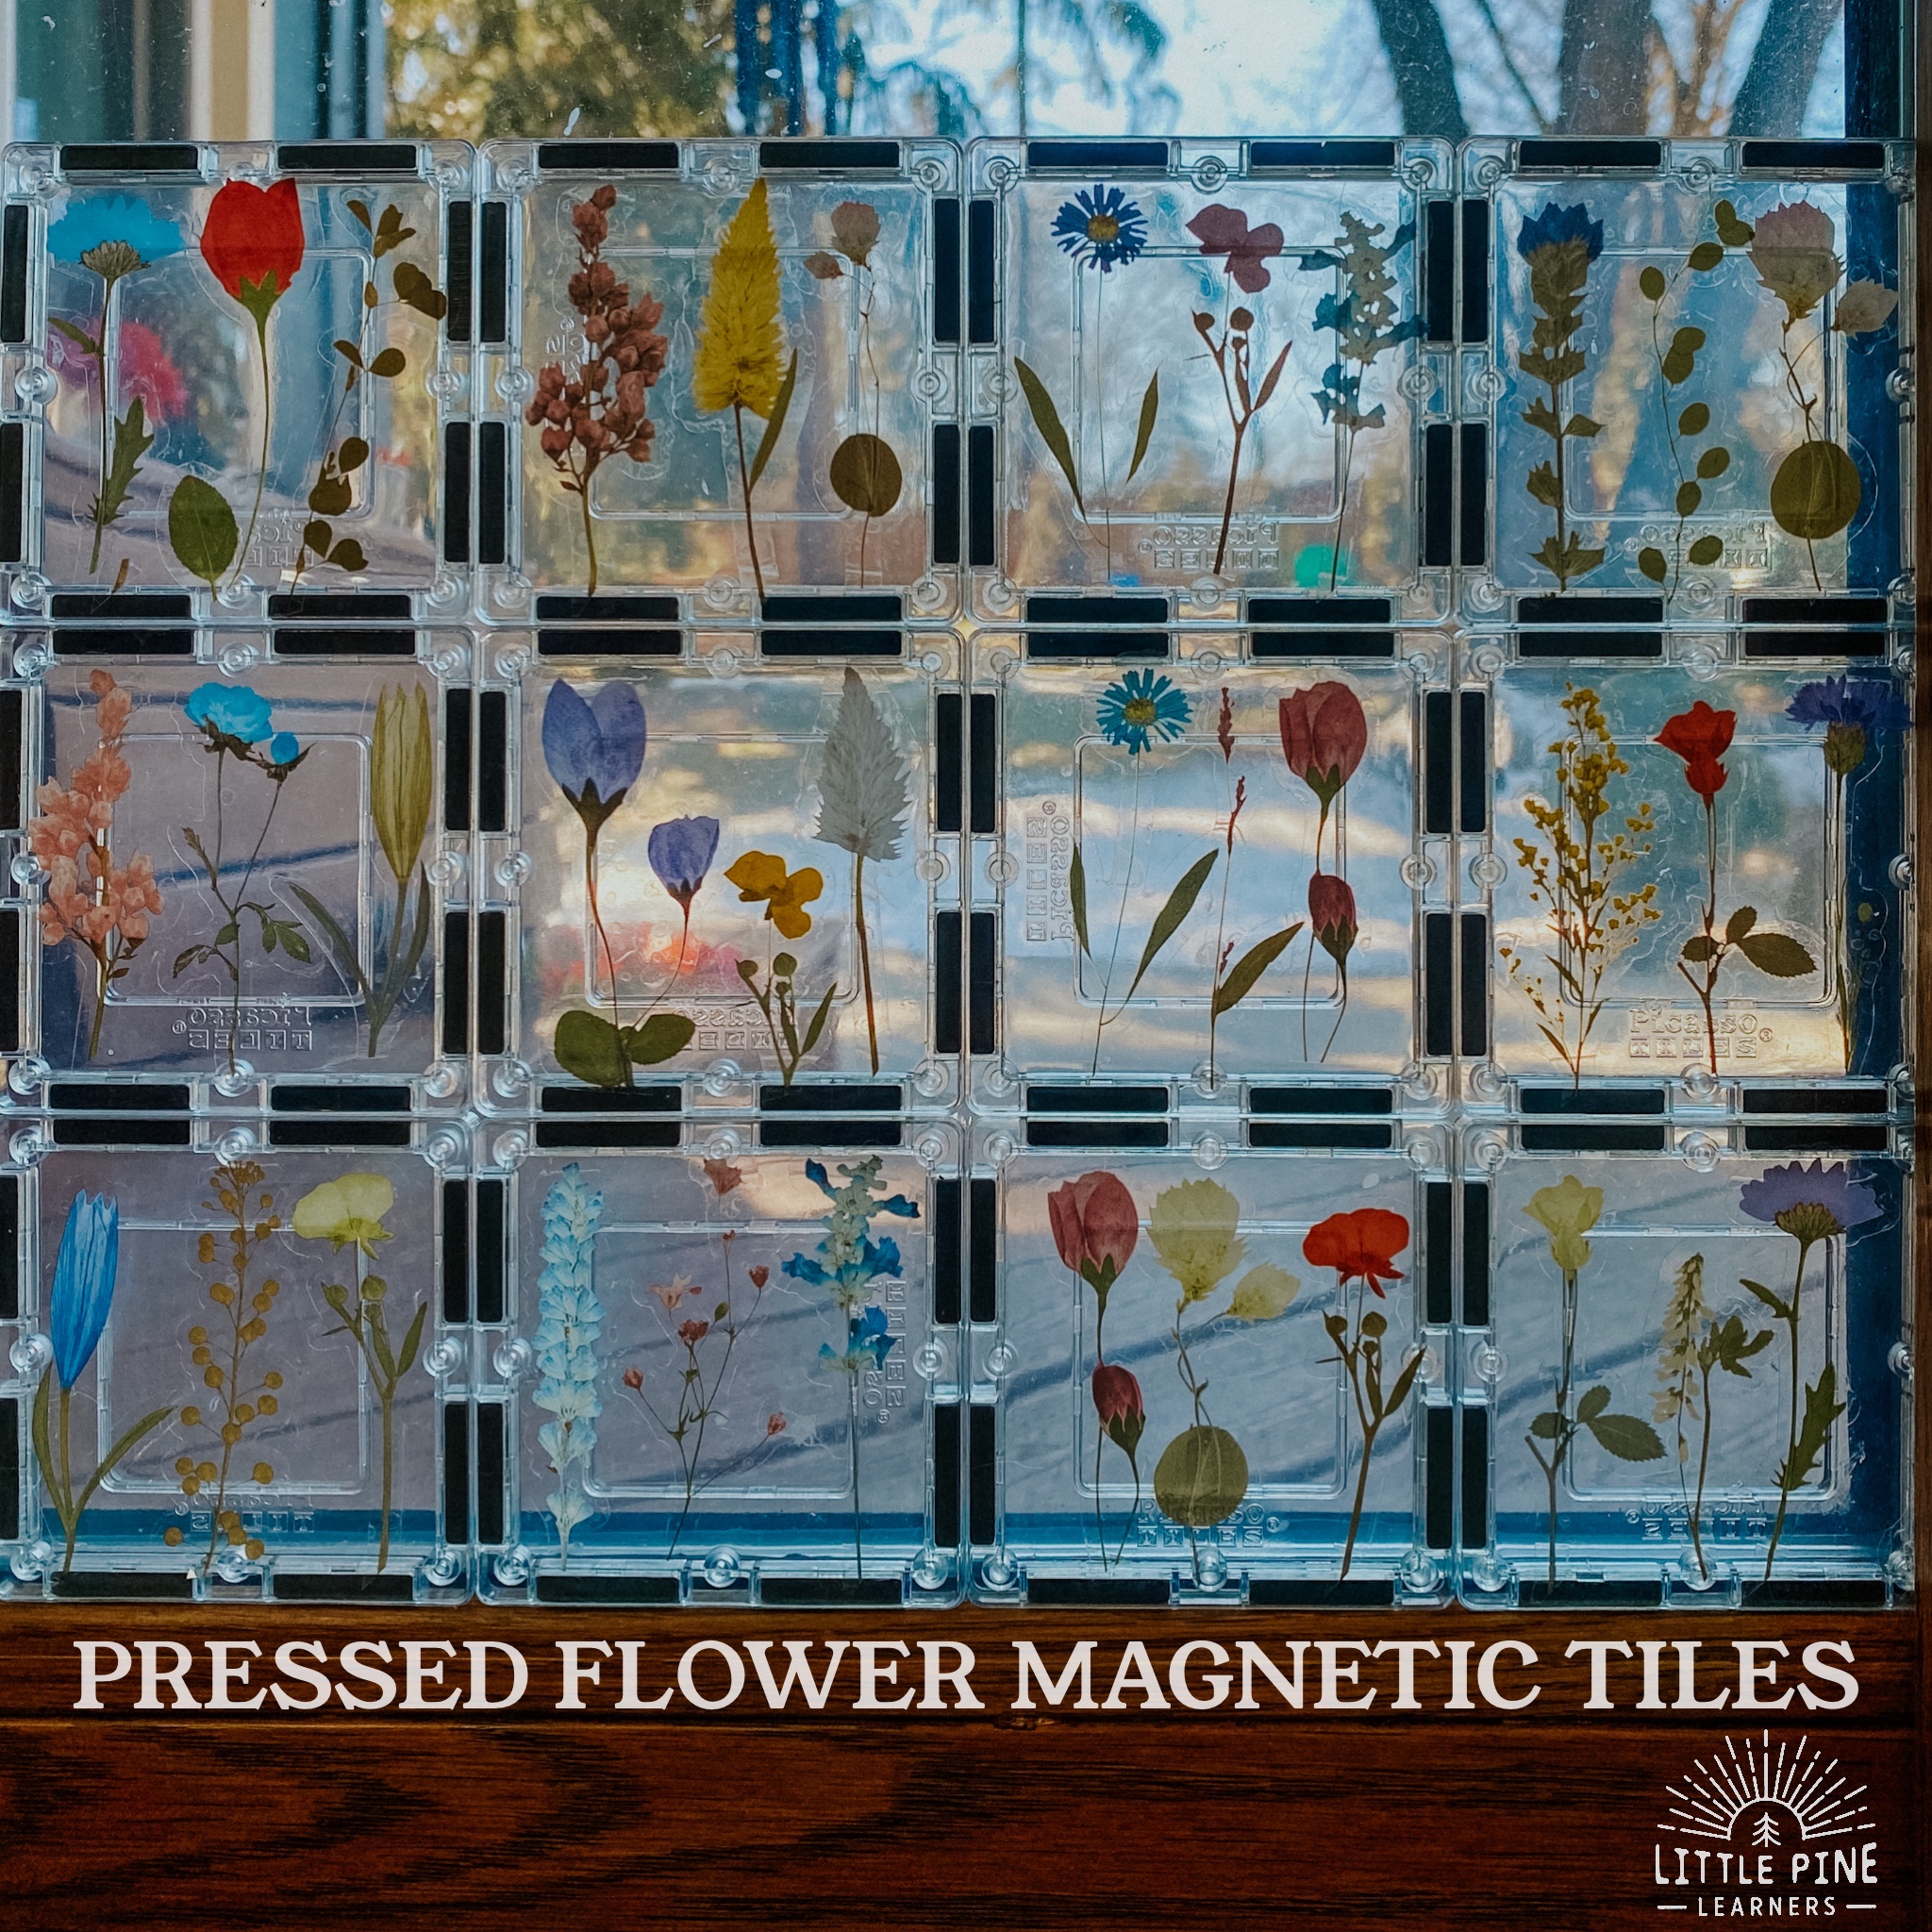 Pressed flower stickers on magnetic tiles